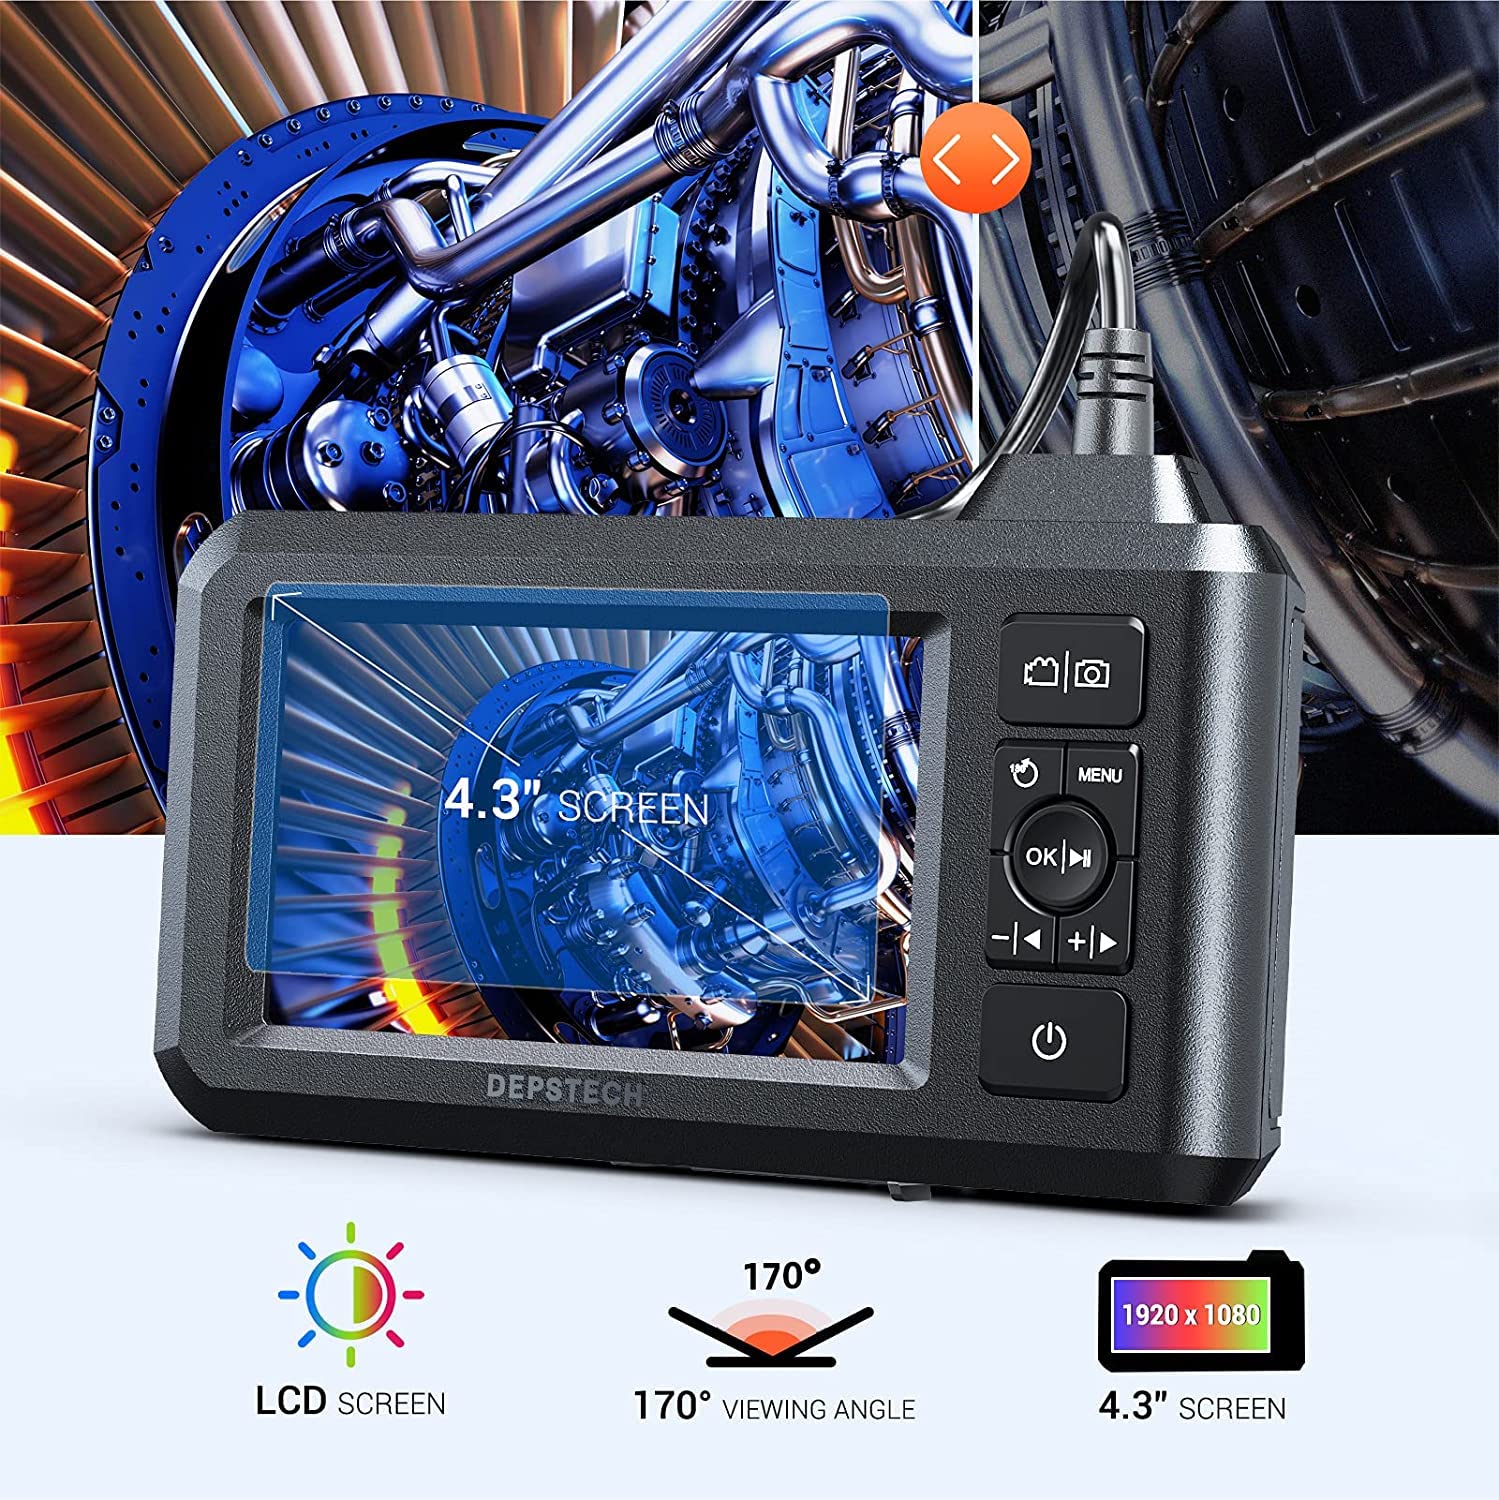 DEPSTECH Dual Lens Industrial Endoscope, Borescope Inspection Sewer Camera  with 4.3" LCD Screen, LED Lights, 32GB Card